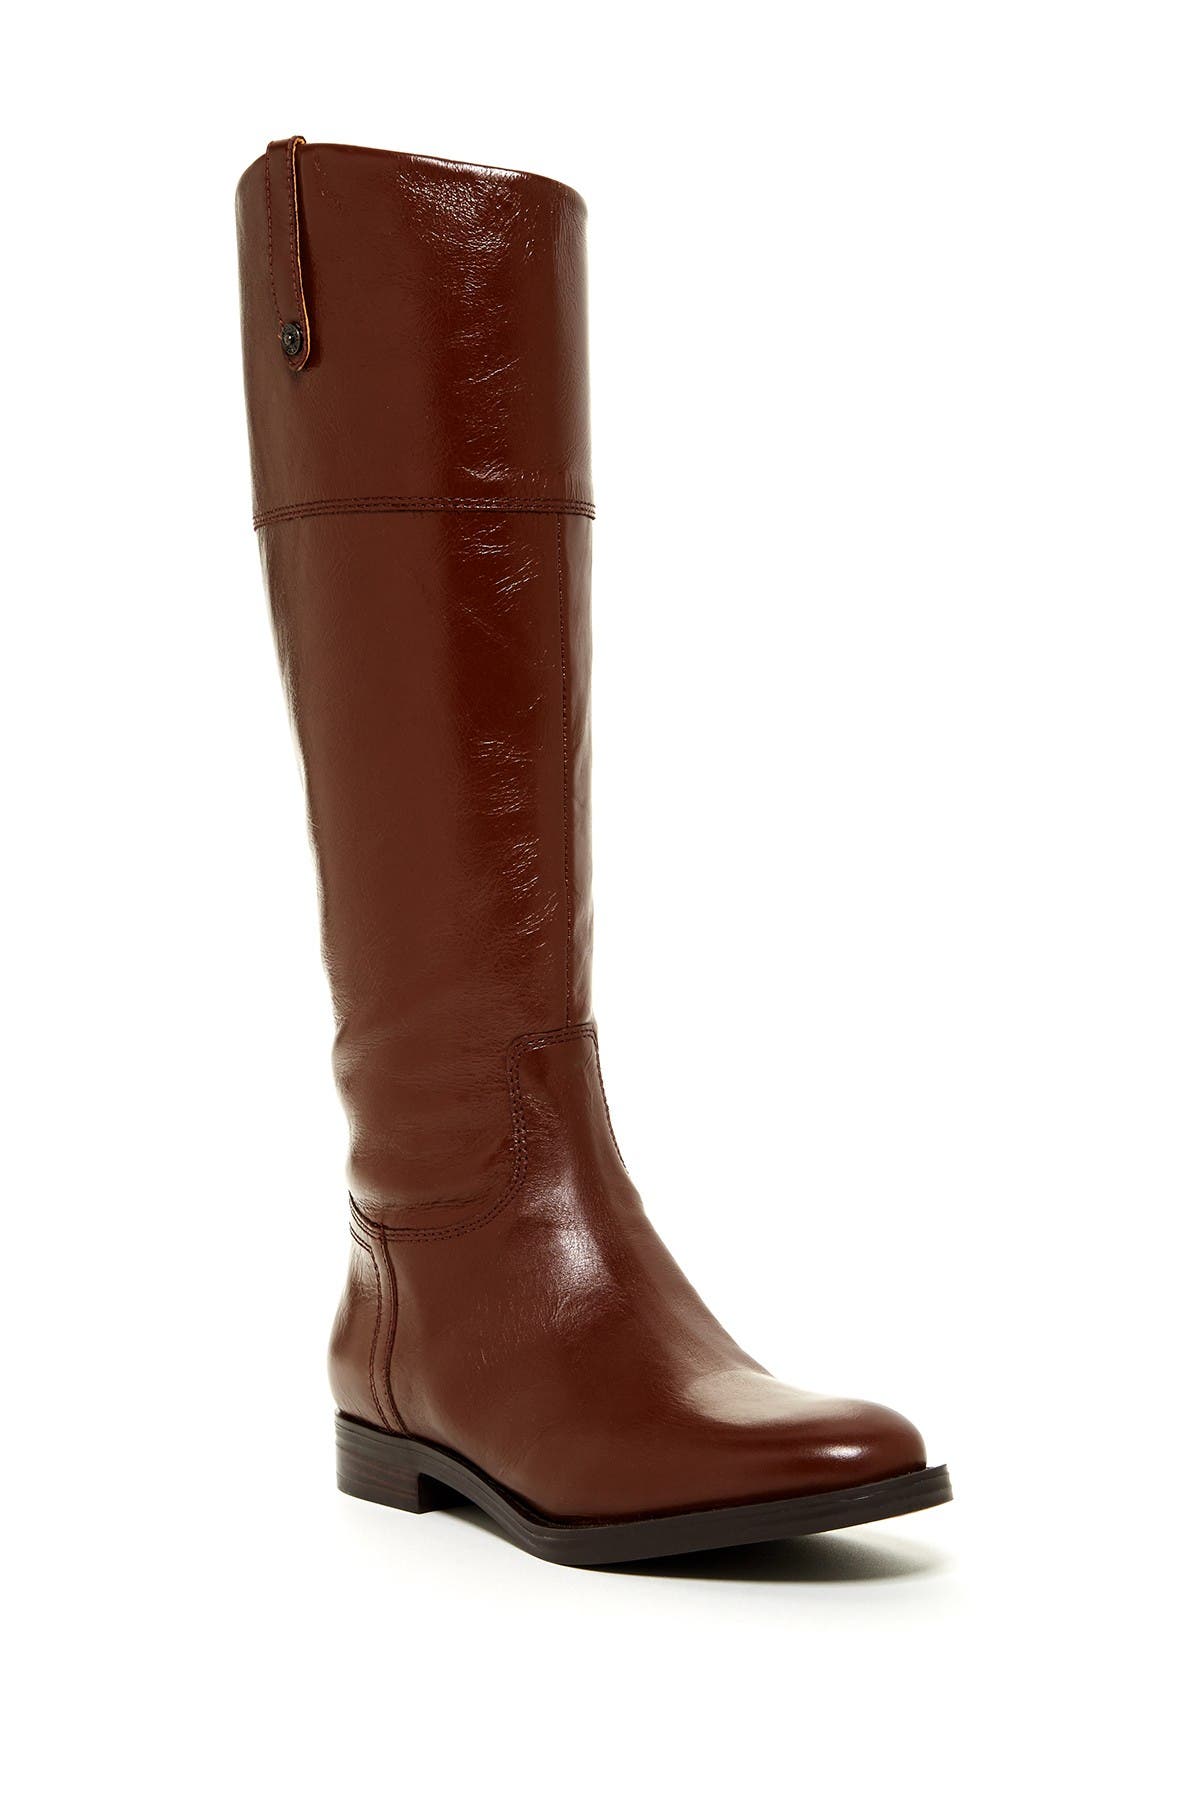 Enzo Angiolini | Ellerby Riding Boot 